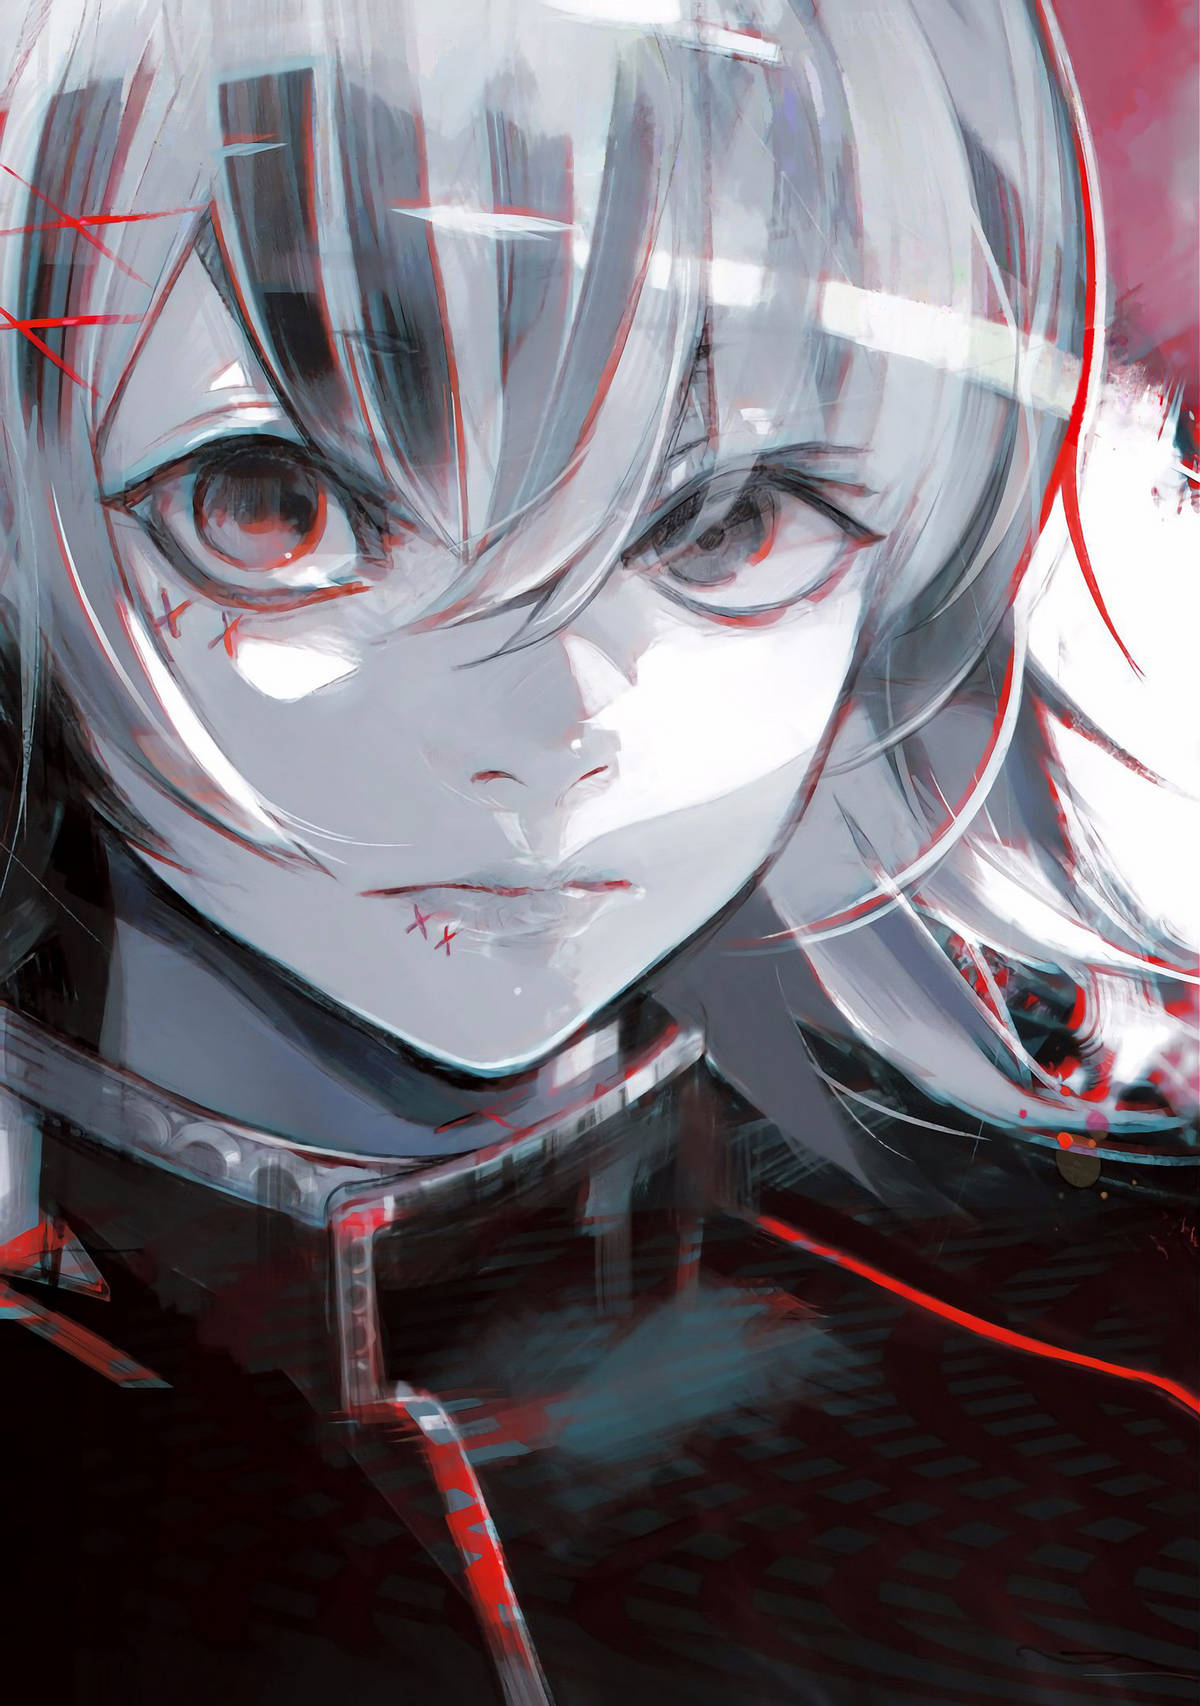 Creepy Juuzou Tokyo Ghoul 4k With Red Stitches Wallpaper